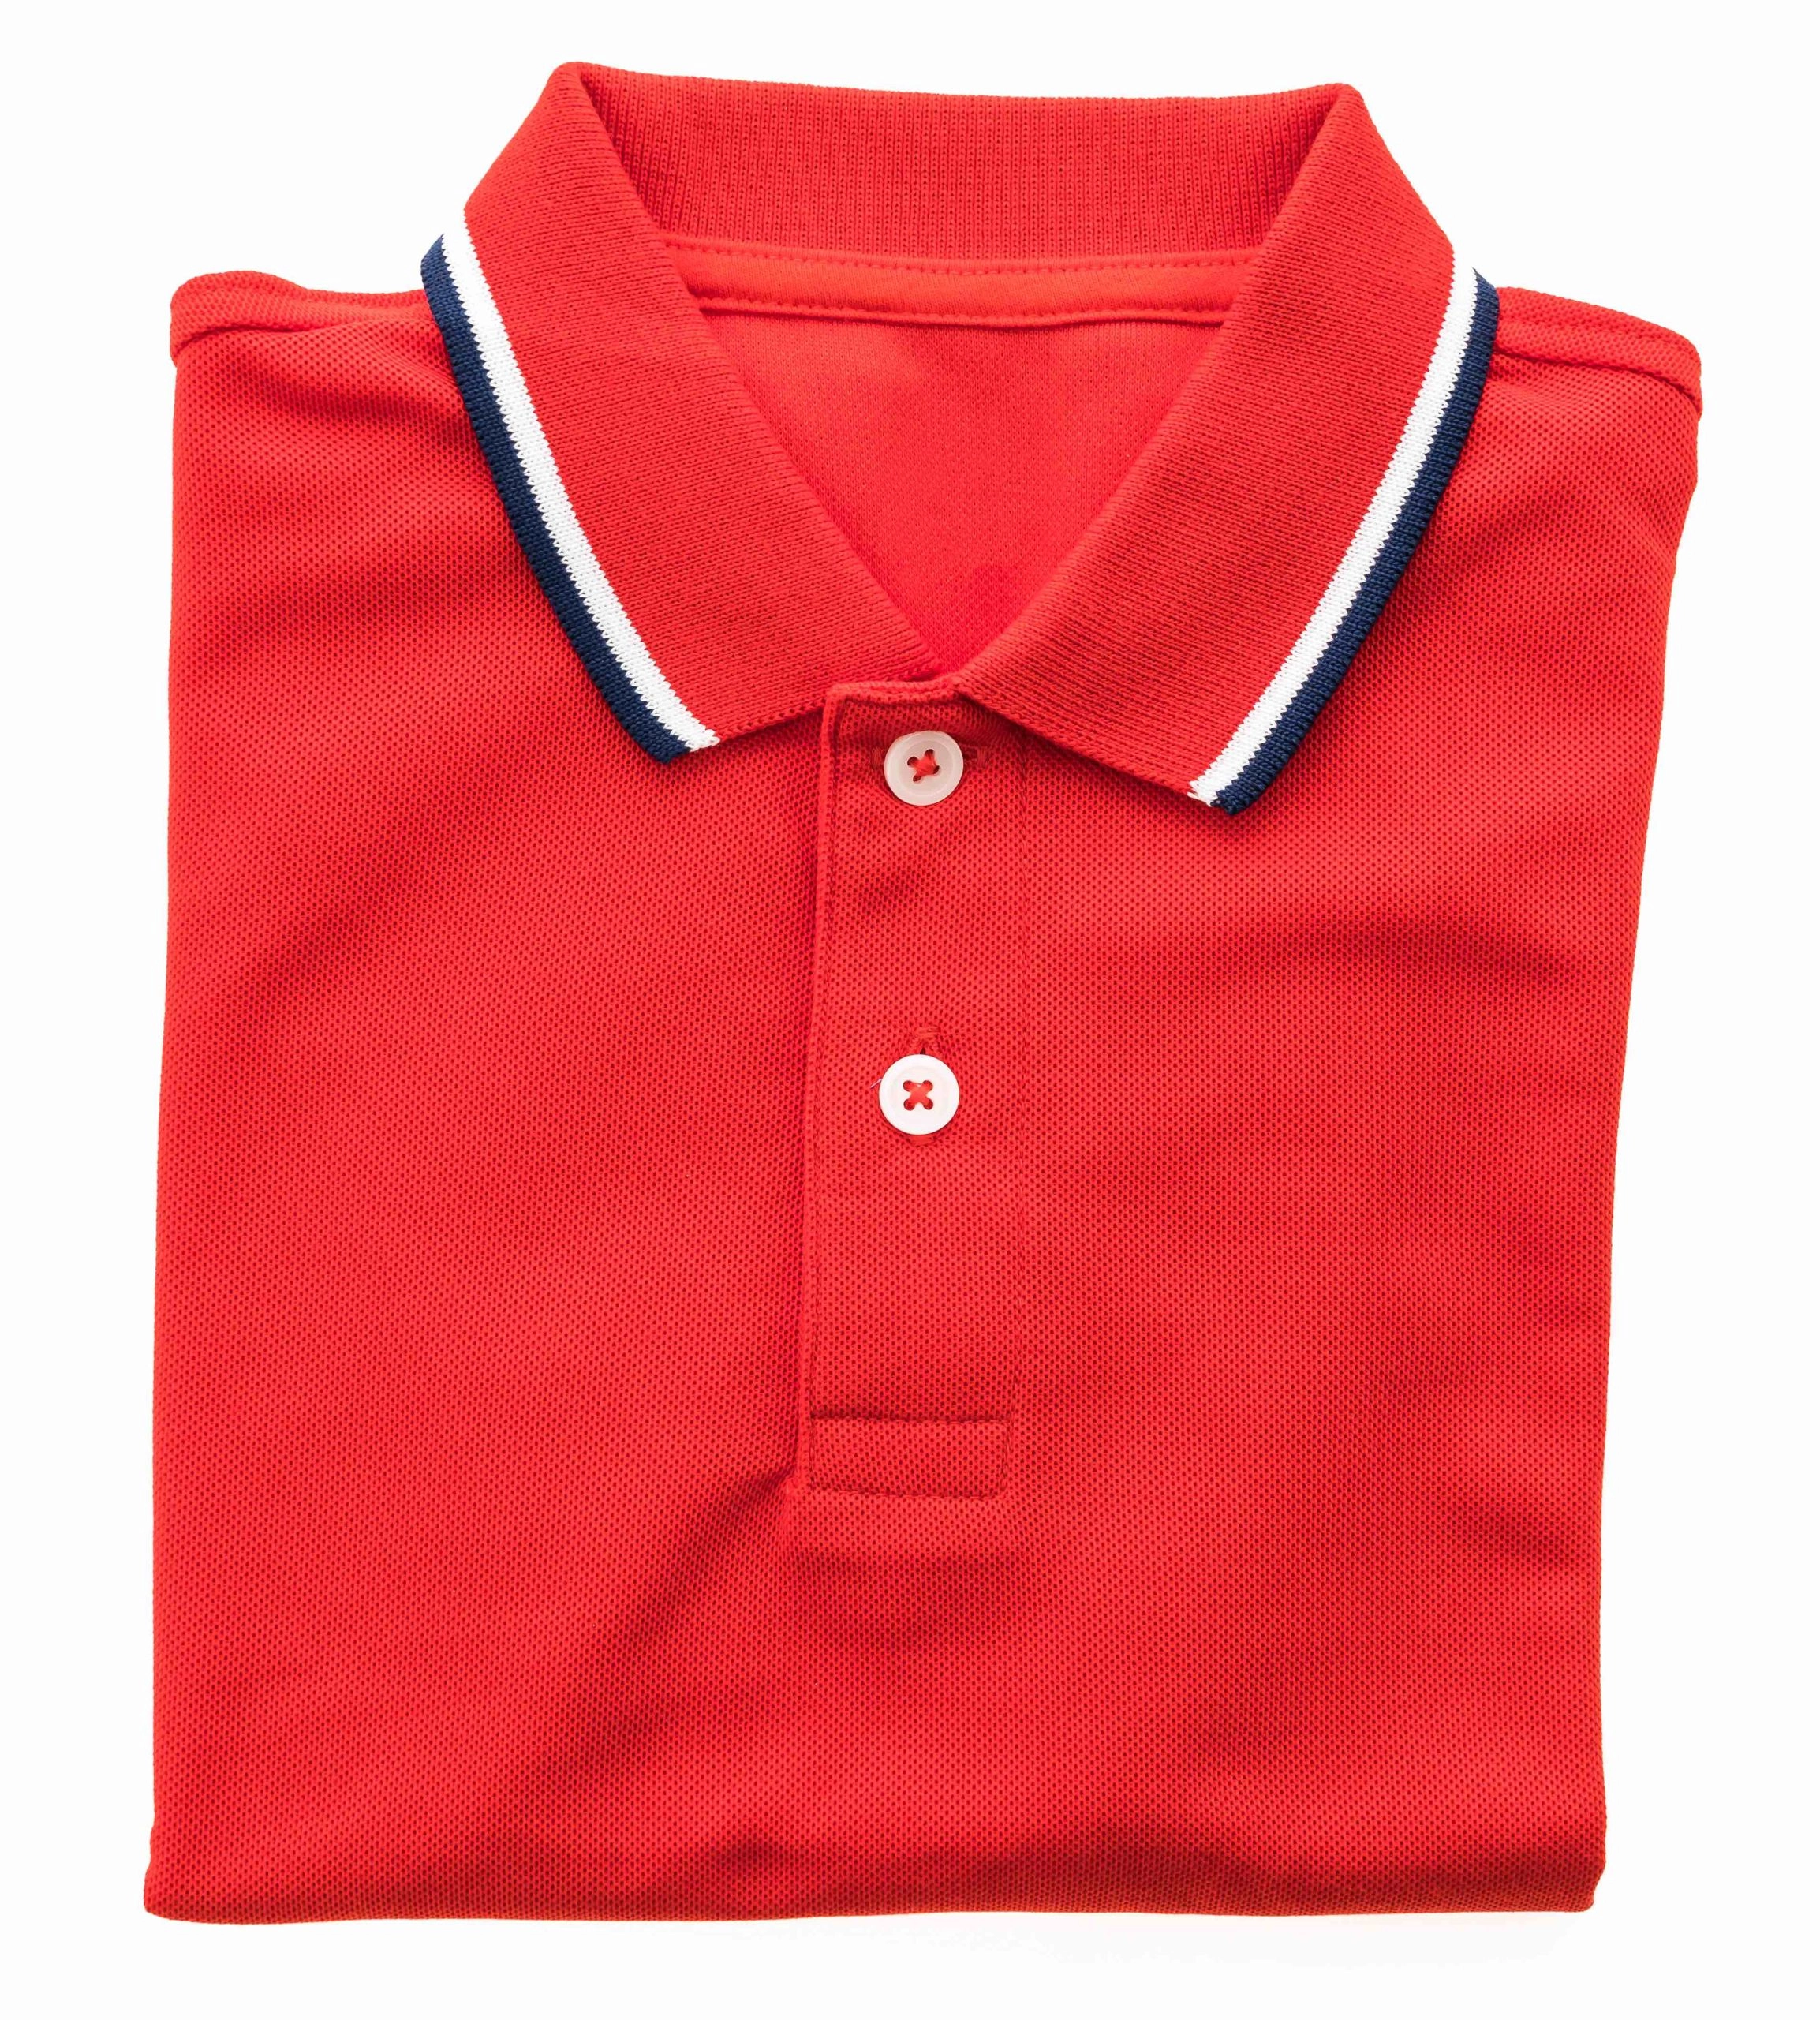 Bangladesh Supplier Of Polo Shirts Stripped Collar And Cuff